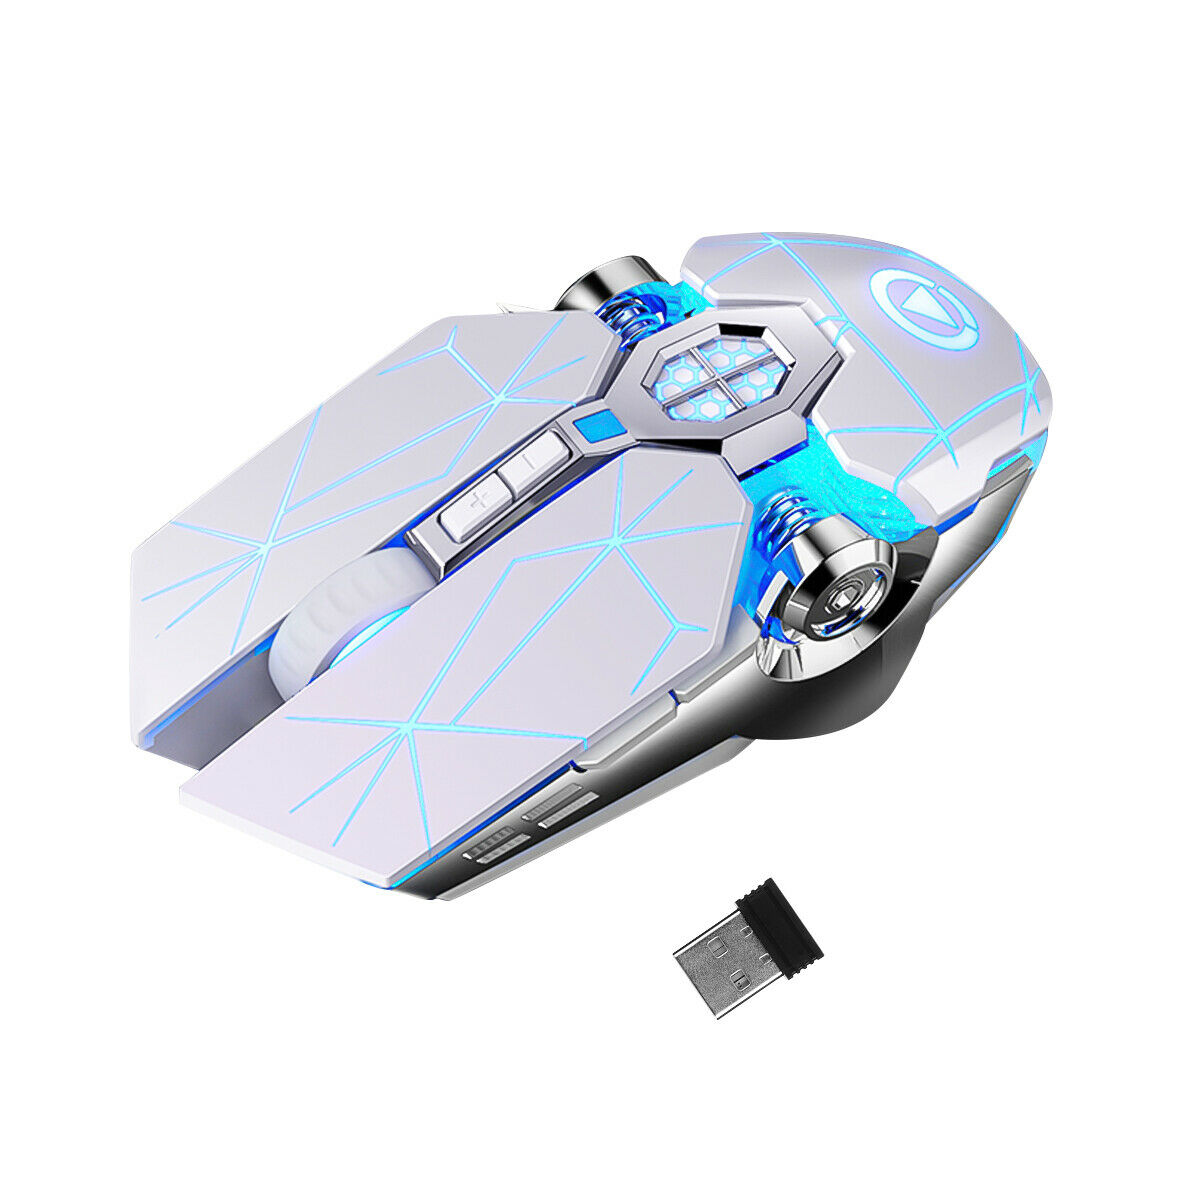 Sanoxy WP-274840882693-MS-WE 2.4GHz 1600DPDPI Wireless Optical Gaming Mouse Mice with USB Receiver 7 Color LED Backlit Rechargeable - W